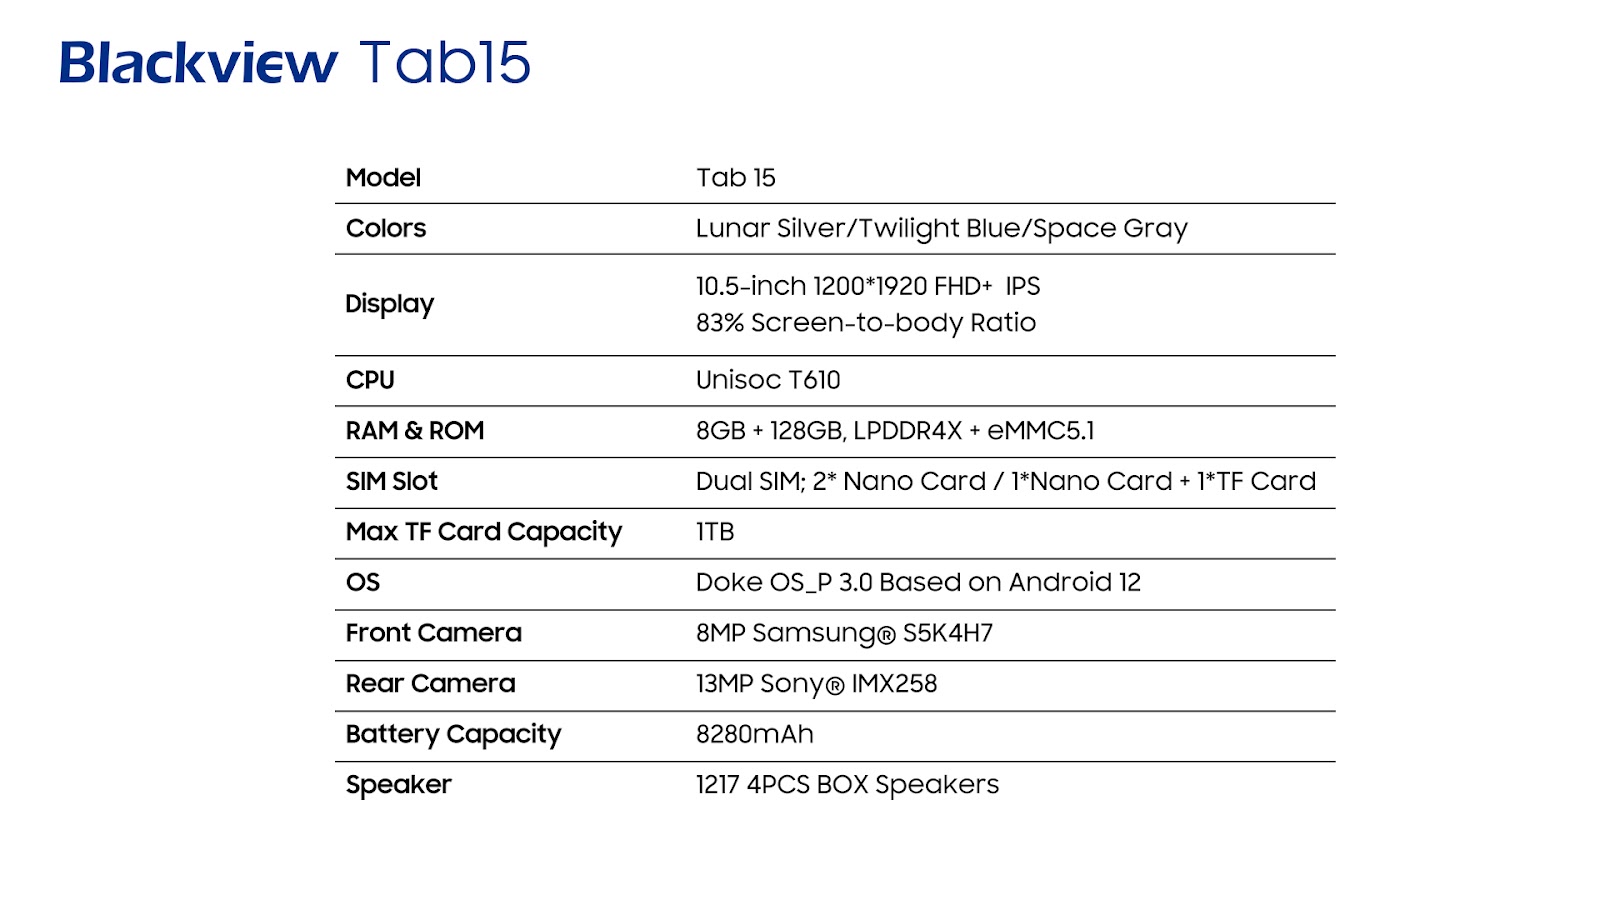 Blackview Tab 15: Specifications Reveal 10.5-inch Display with Smart-K Quad-Box Speakers, At An Affordable Price Tag 14